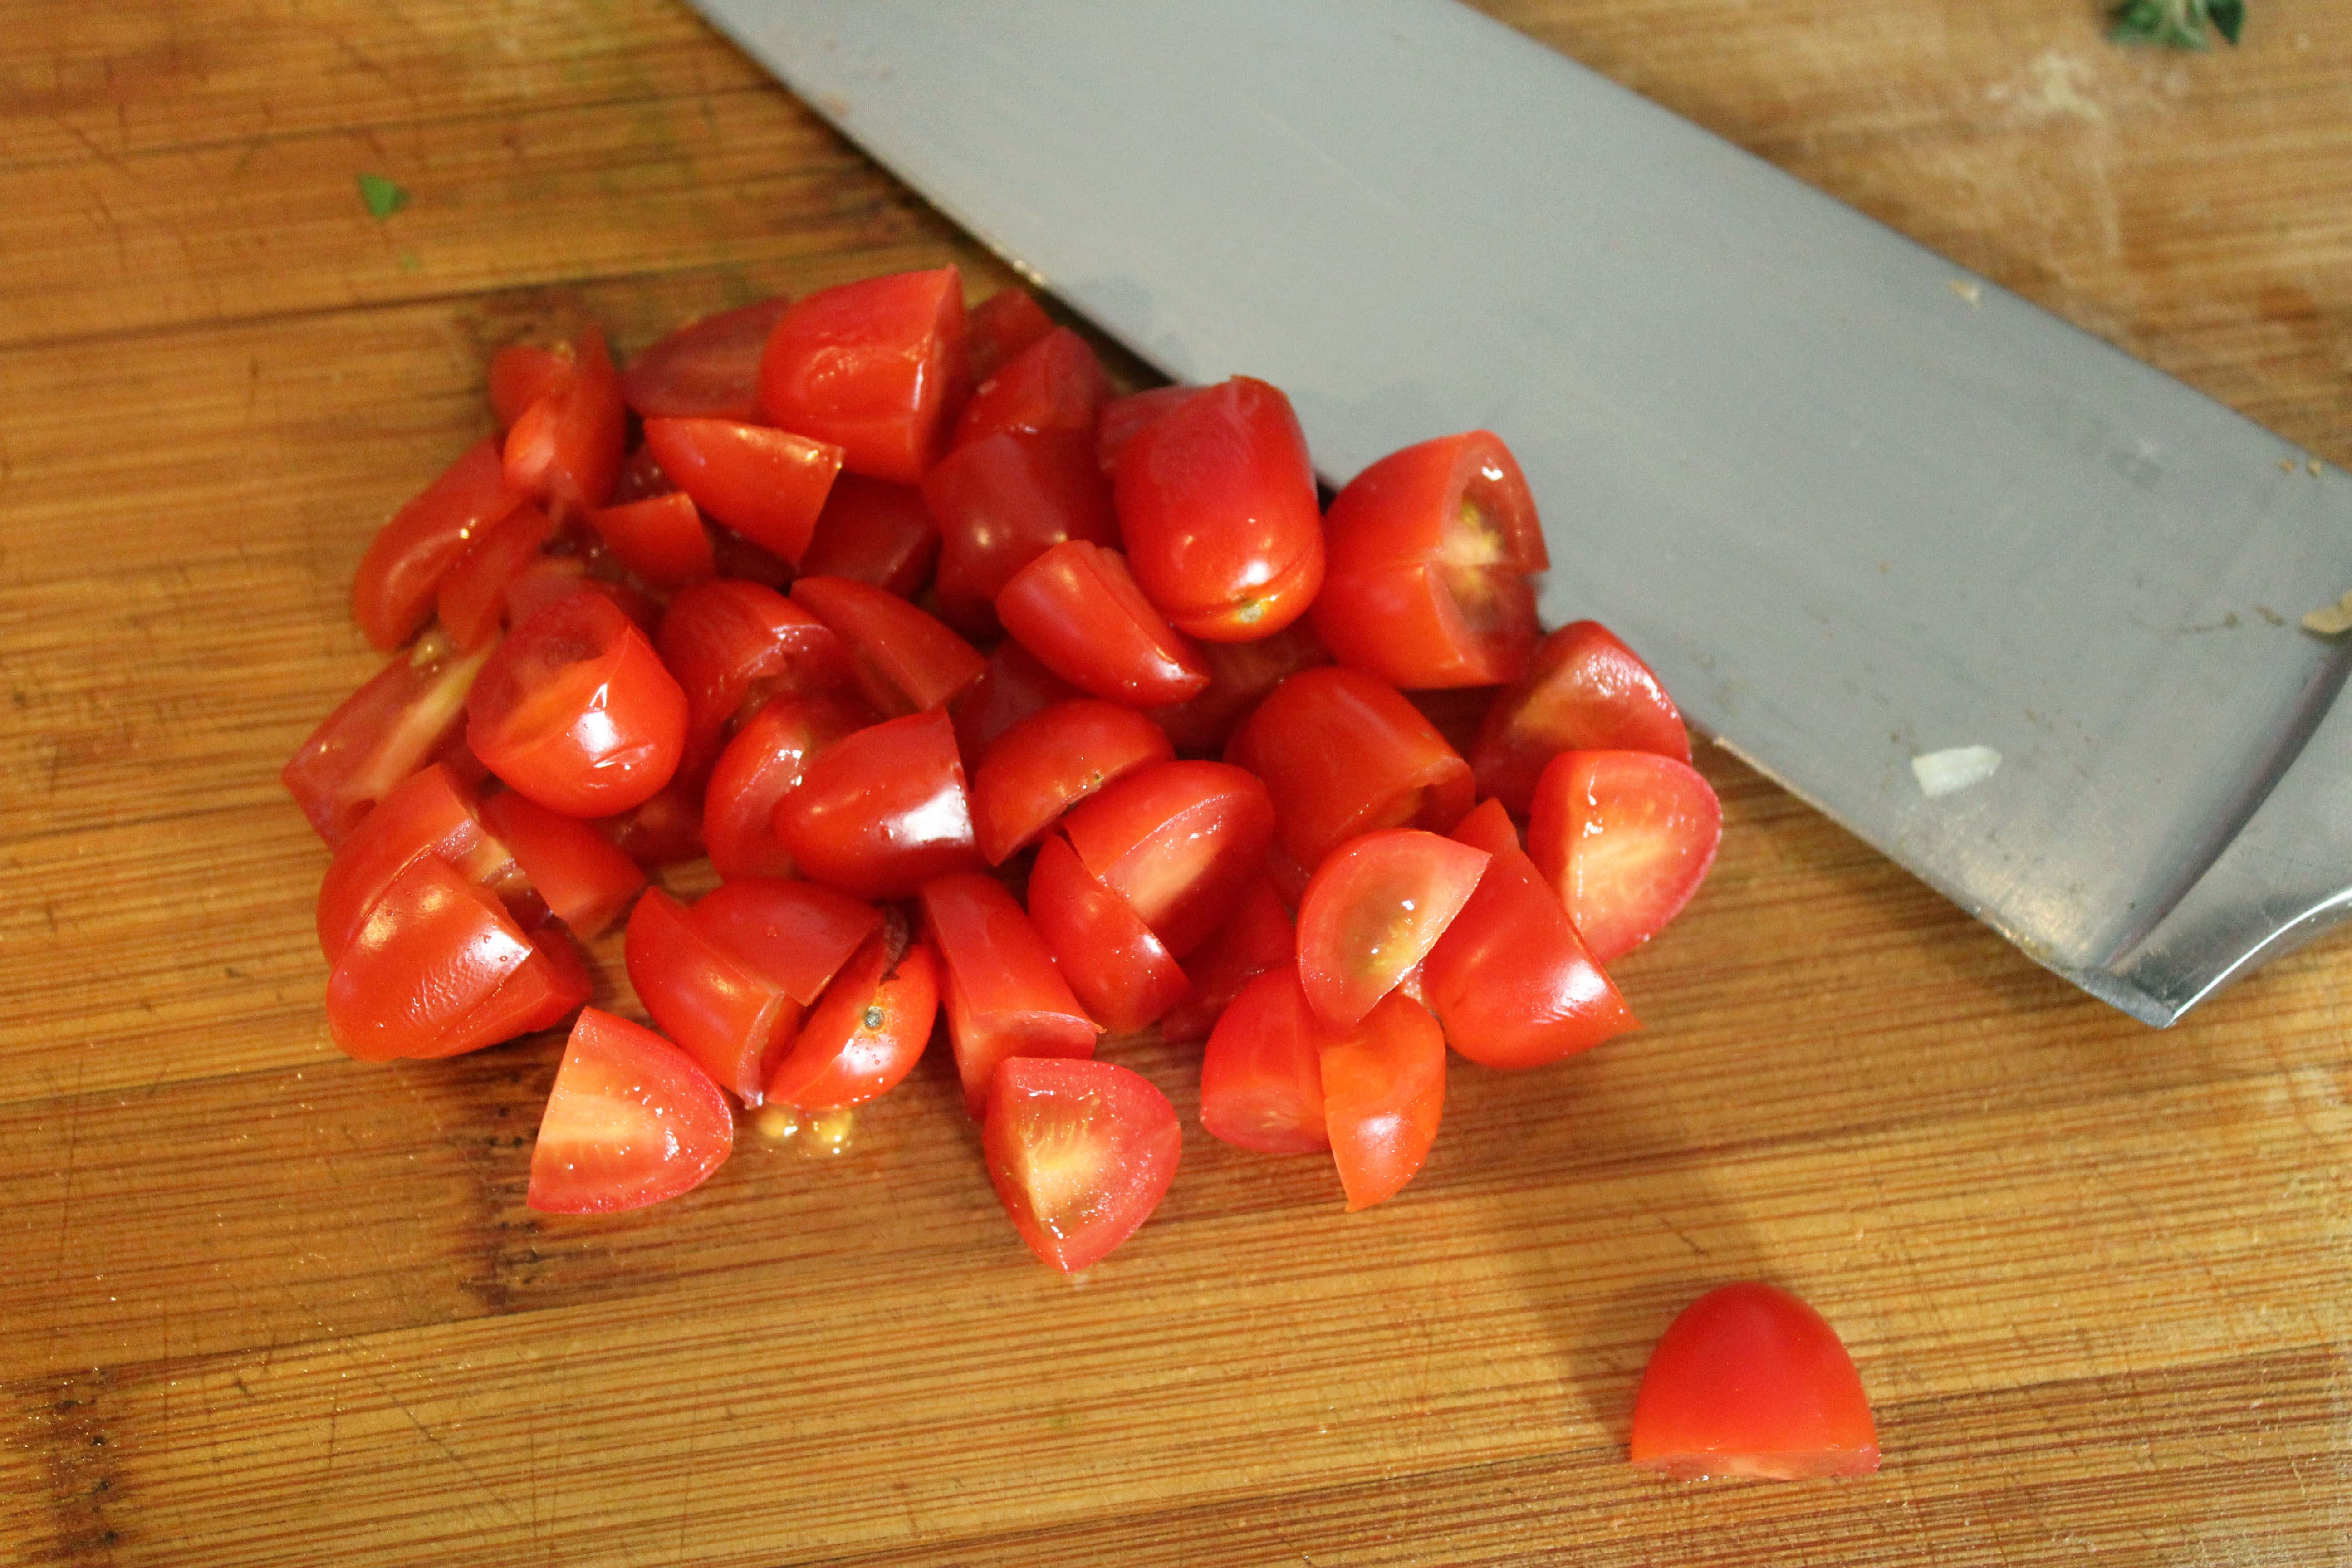 Chop tomatoes for topping